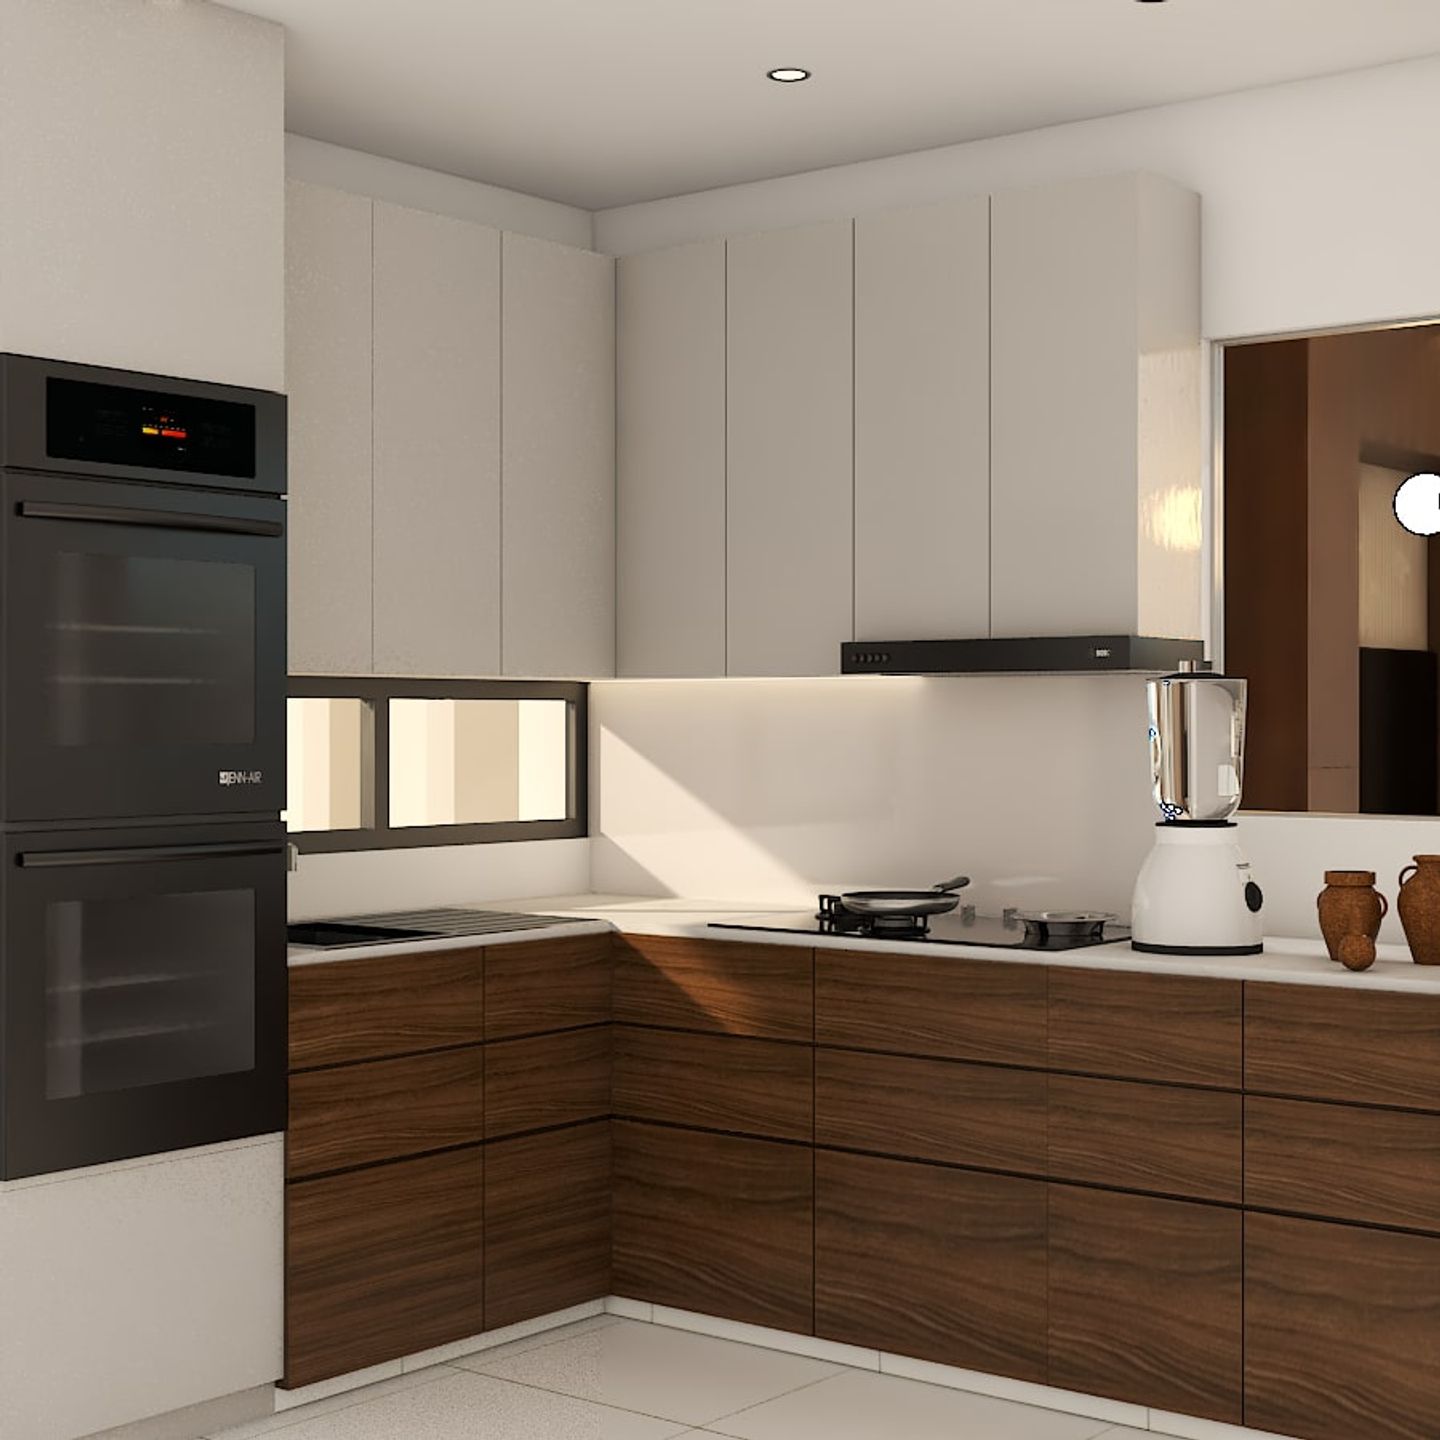 Modern Compact Kitchen Cabinet Design With Ambient Lighting